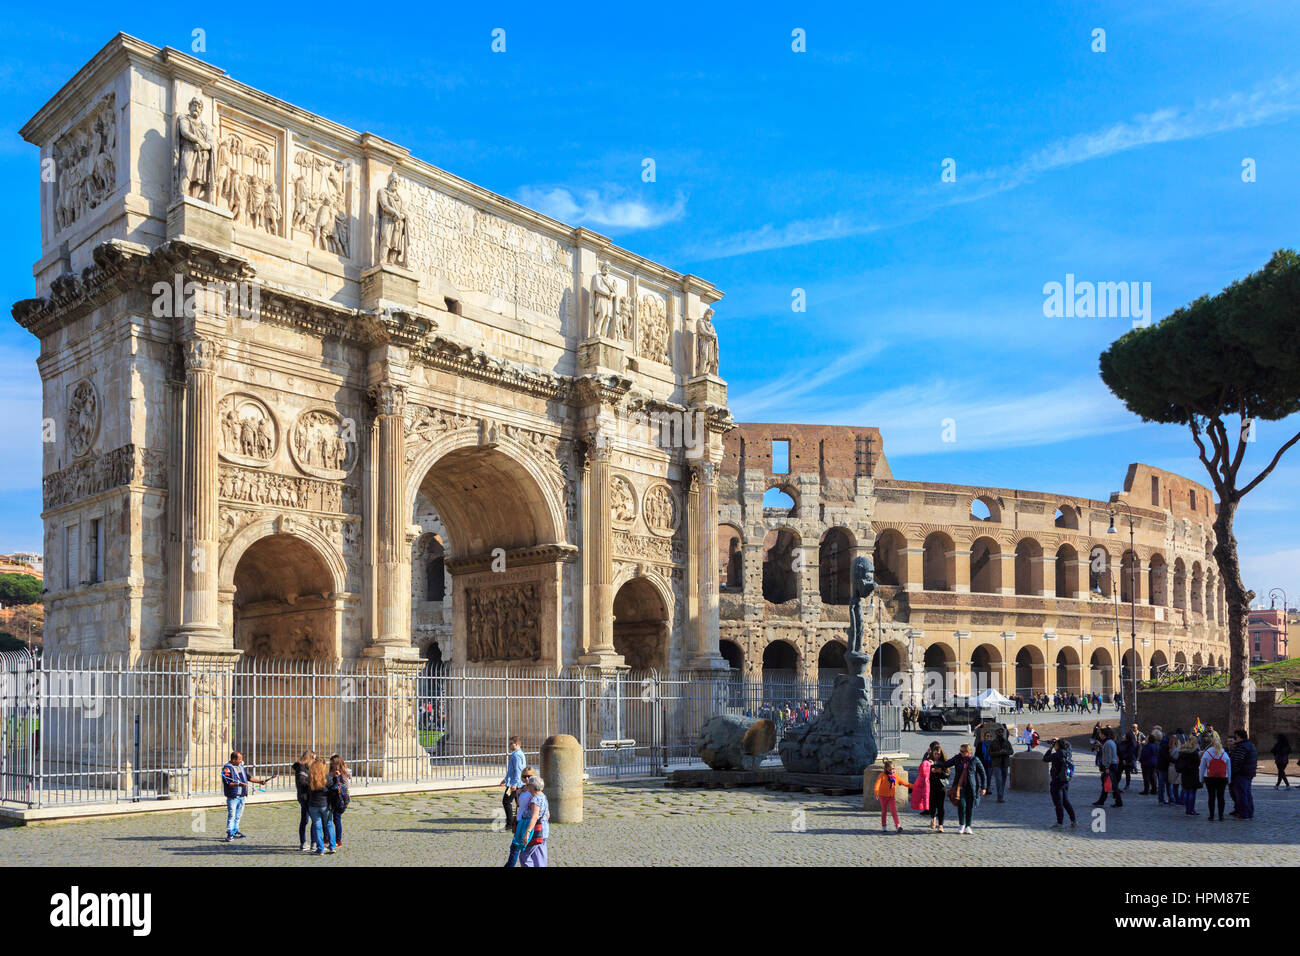 Arco de Constantino, the Triumphal arch built by the Senators in AD315, situated on the Via Triumphalis, between Palatine Hill and the Colosseum is Ro Stock Photo